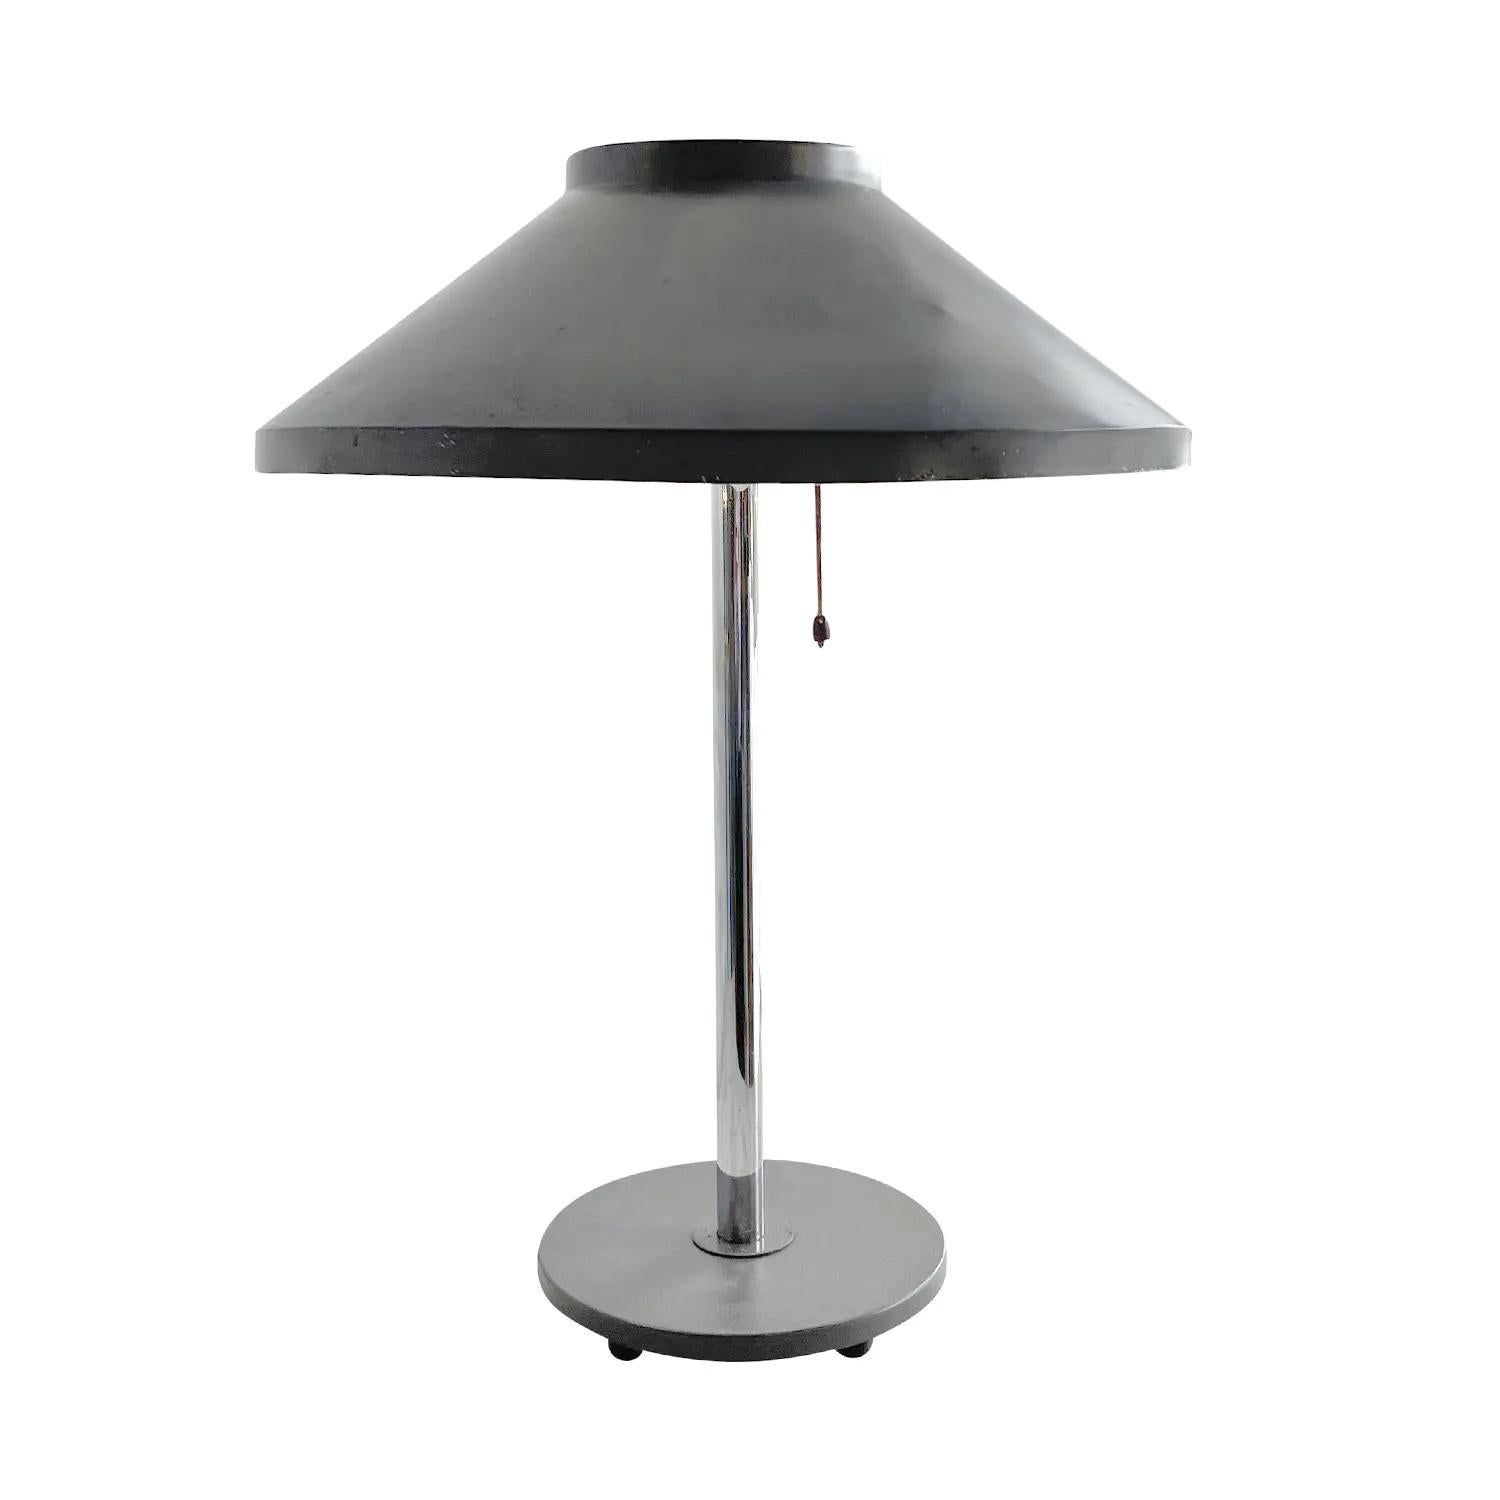 A vintage Mid-Century Modern Swedish table luminaire, lamp made of hand crafted chrome with a round grey sheet metal shade, designed and produced by Falkenbergs Belysning in good condition. The Scandinavian desk light is featuring a one light